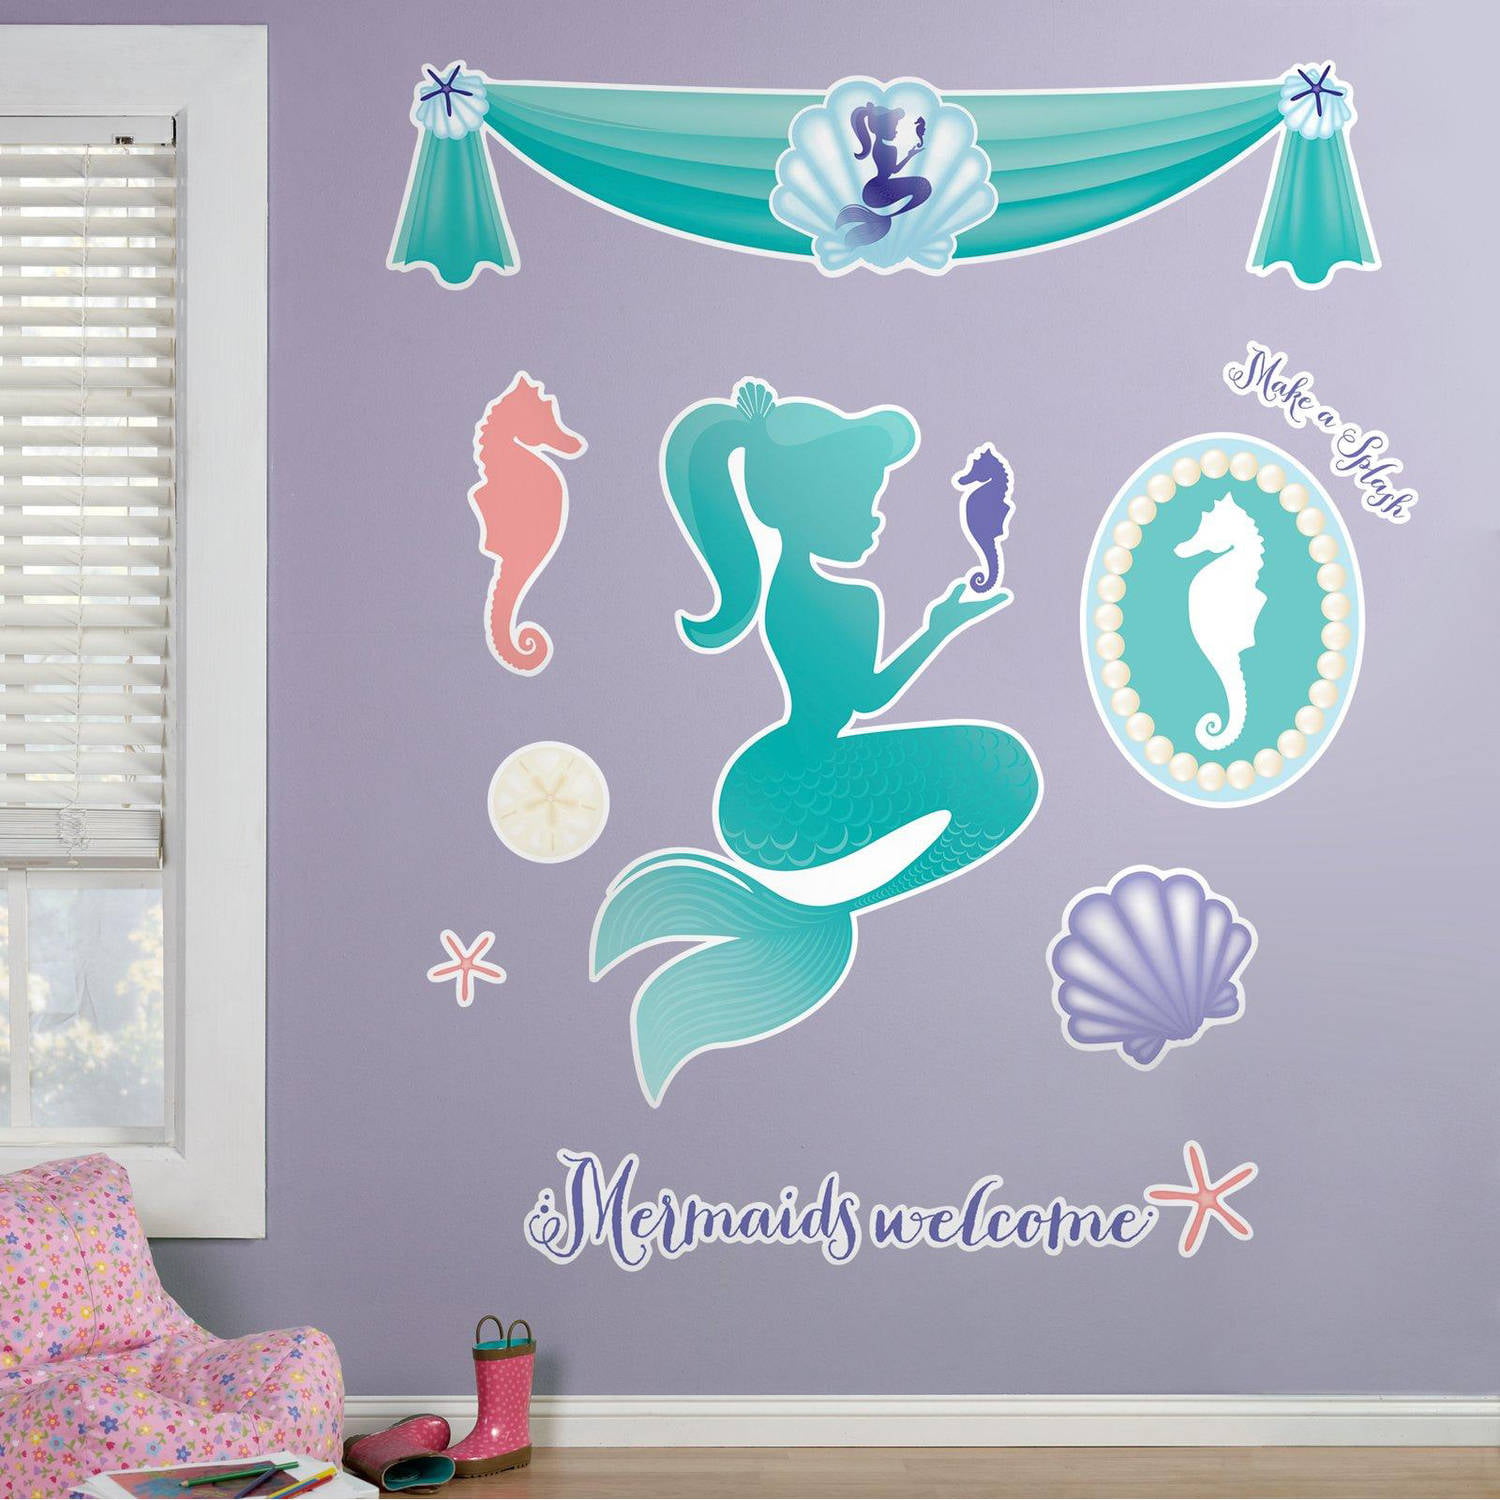 Dolphin and mermaid sticker large mermaid decal